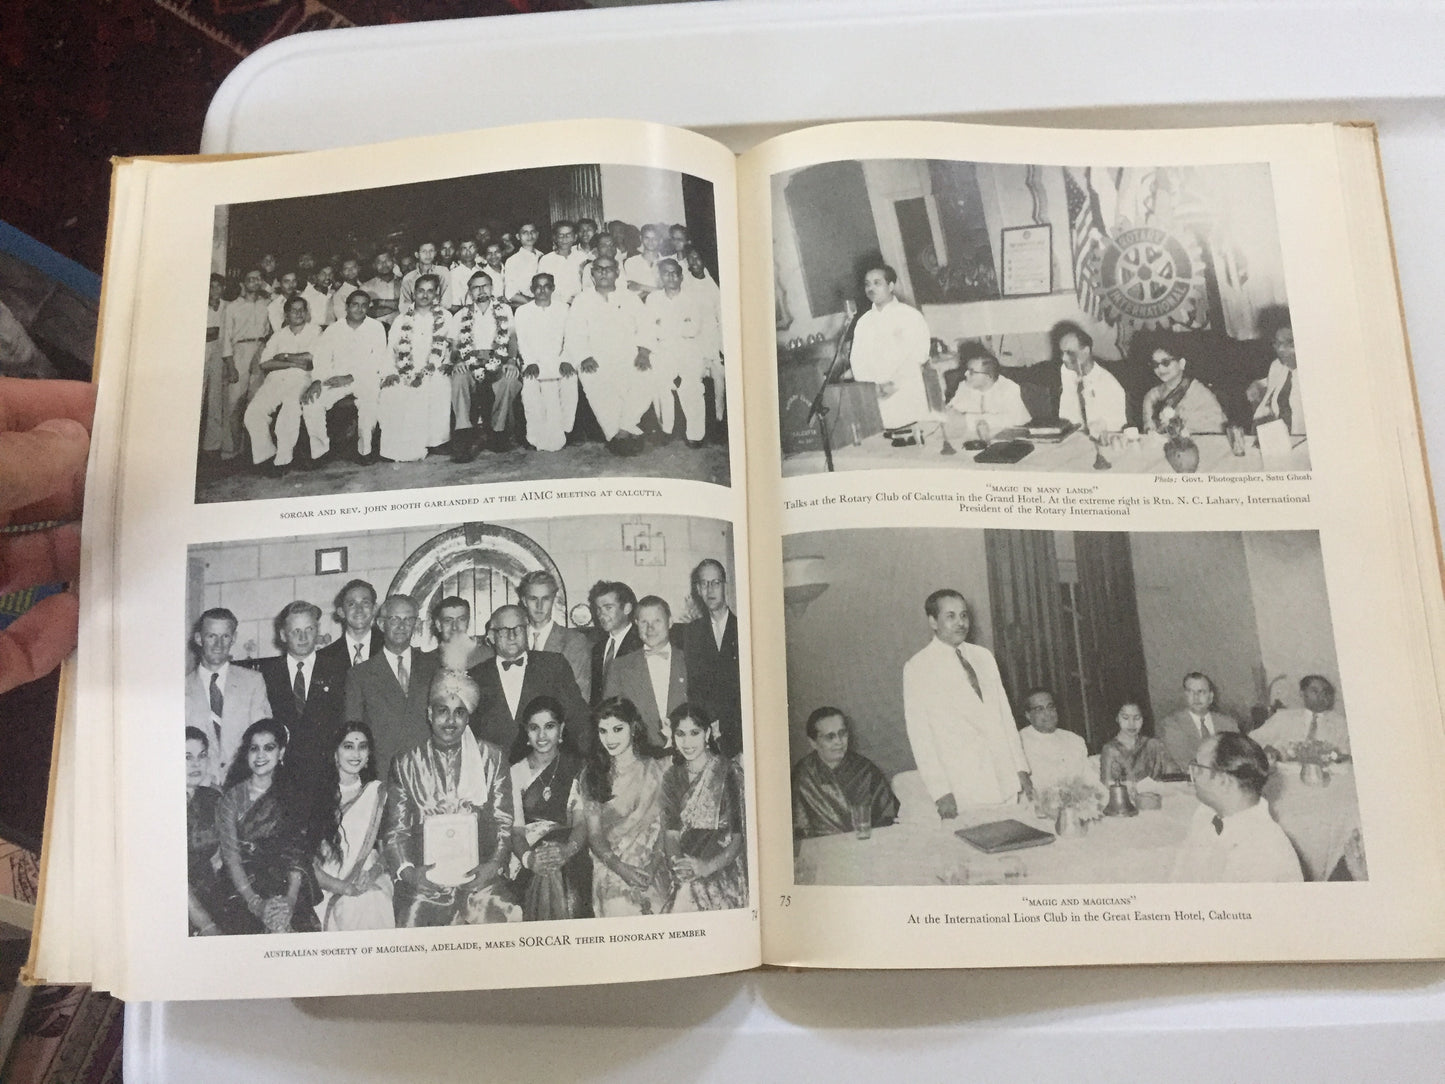 TWGM The Great Sorcar - A Photographic Monograph of his 50th Birthday